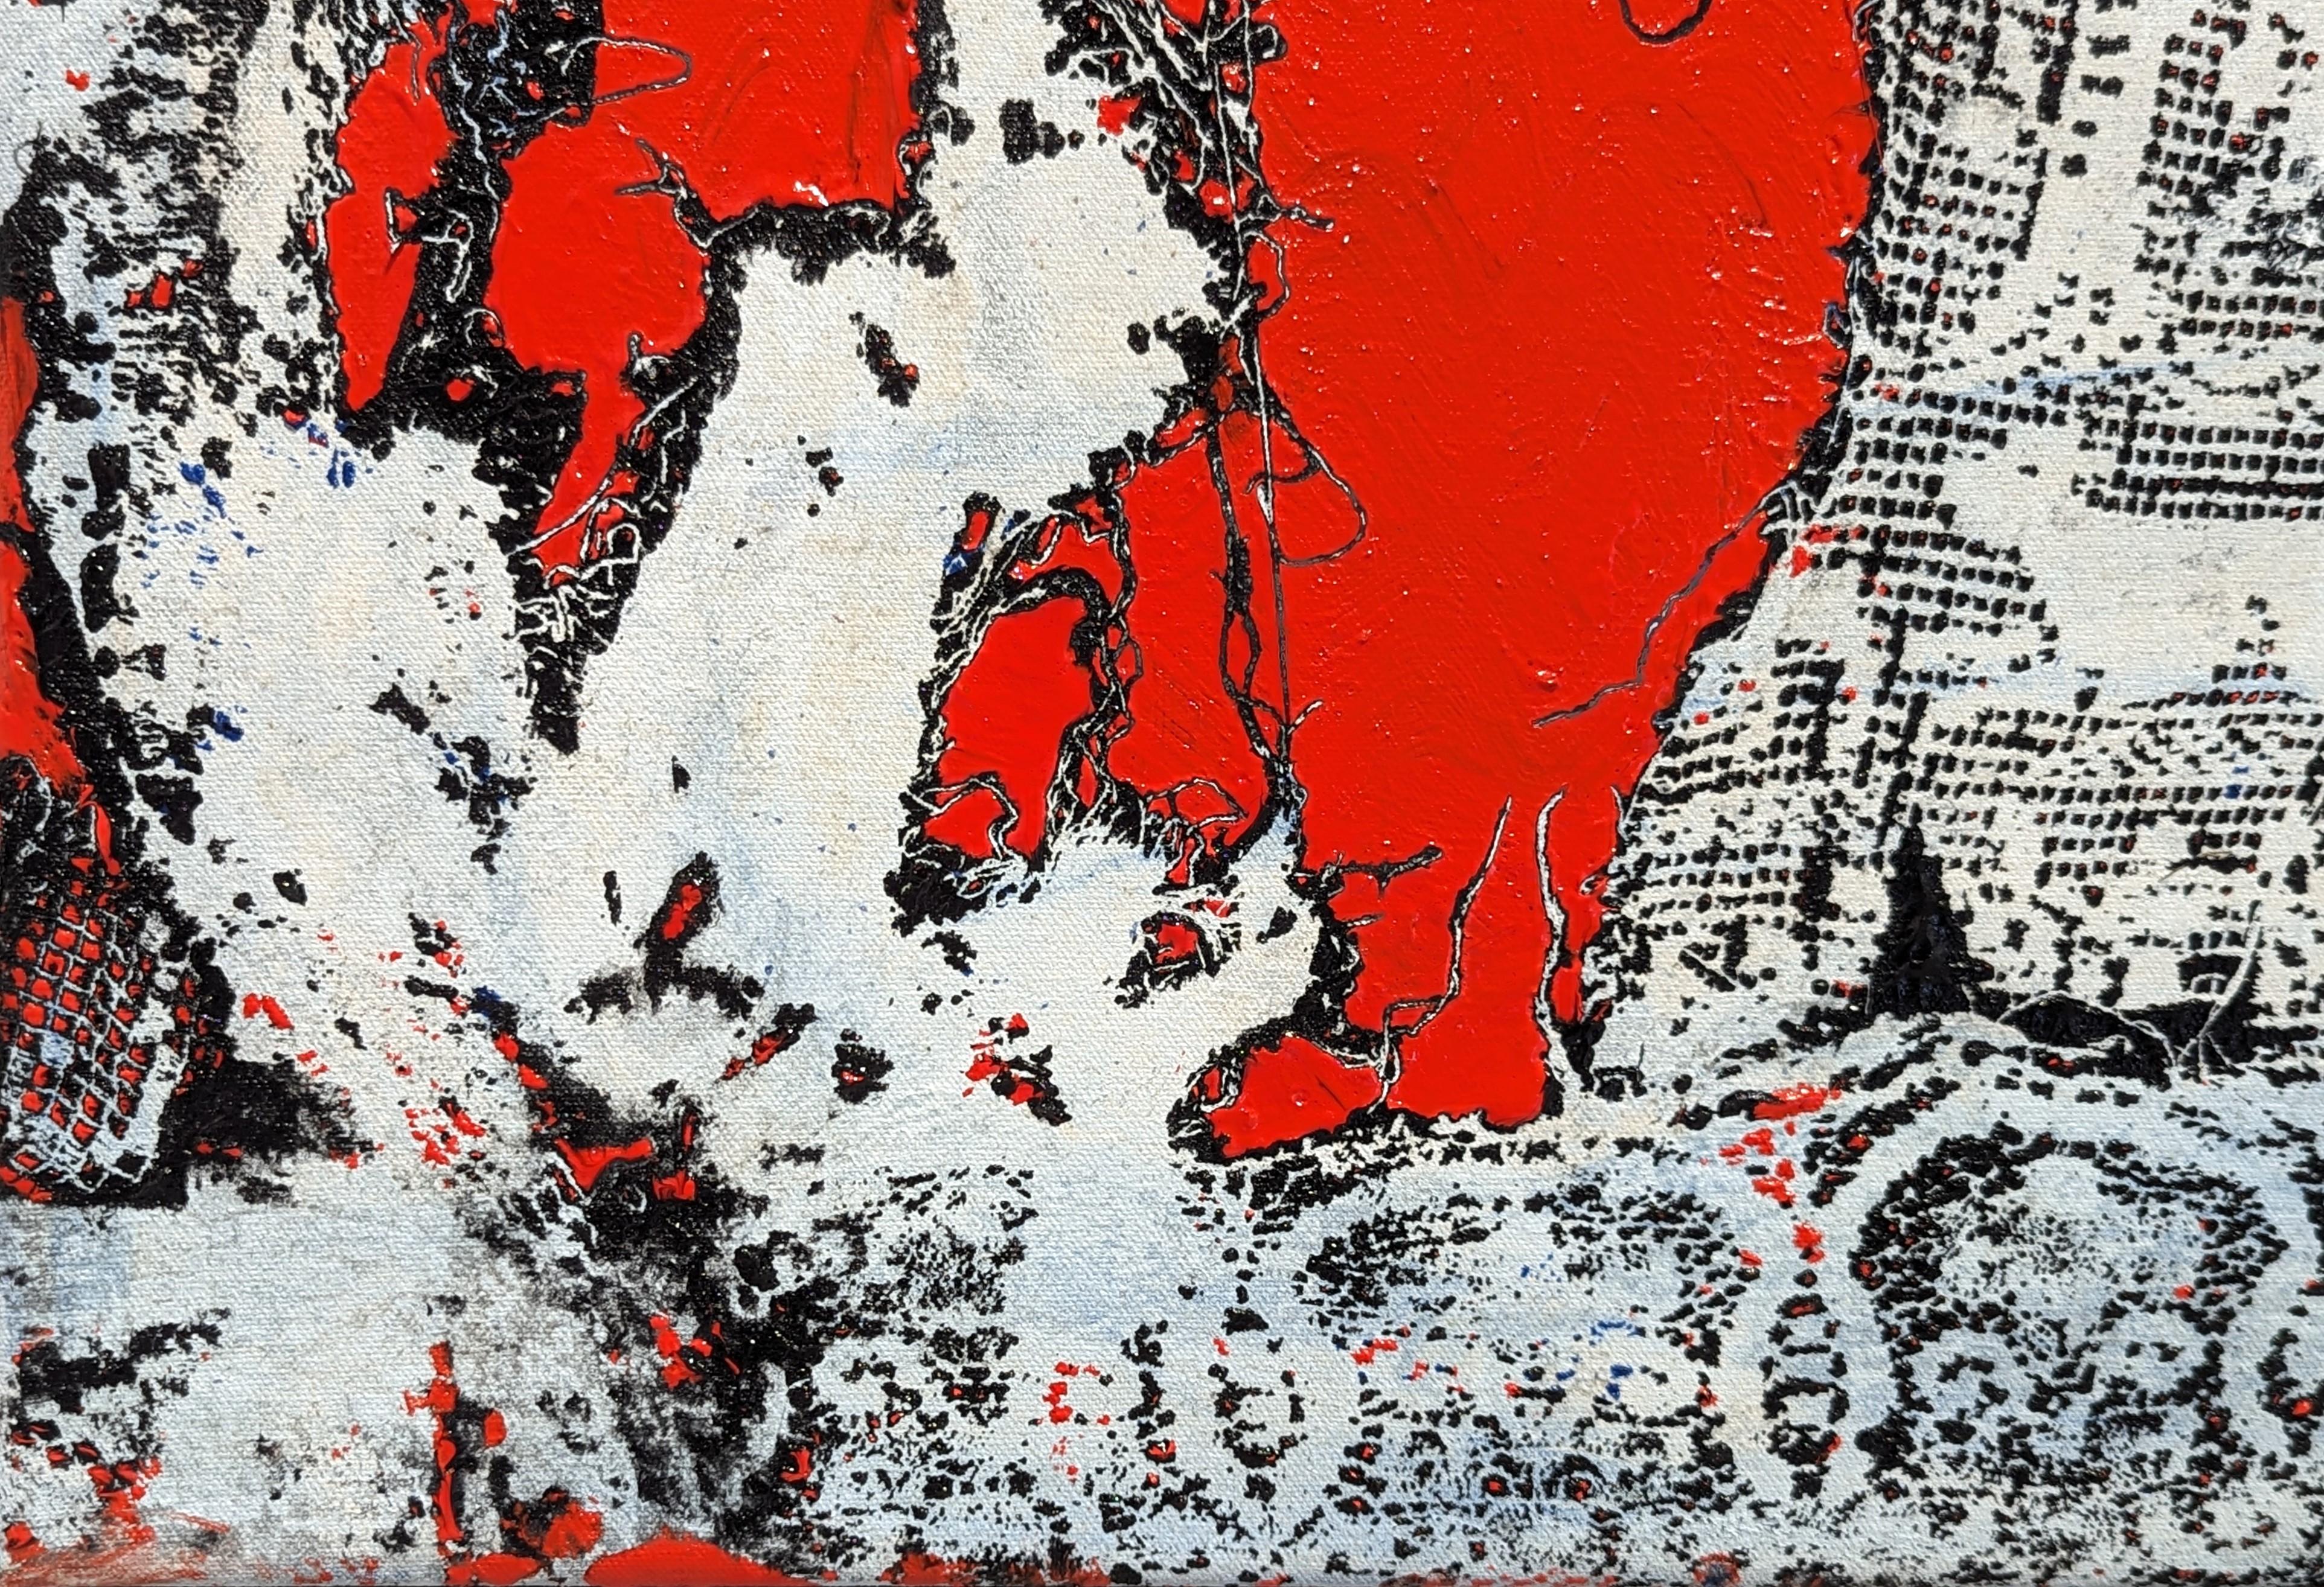 “Red Hunt” Contemporary Red, Black, & White Abstract Lace Painting For Sale 3